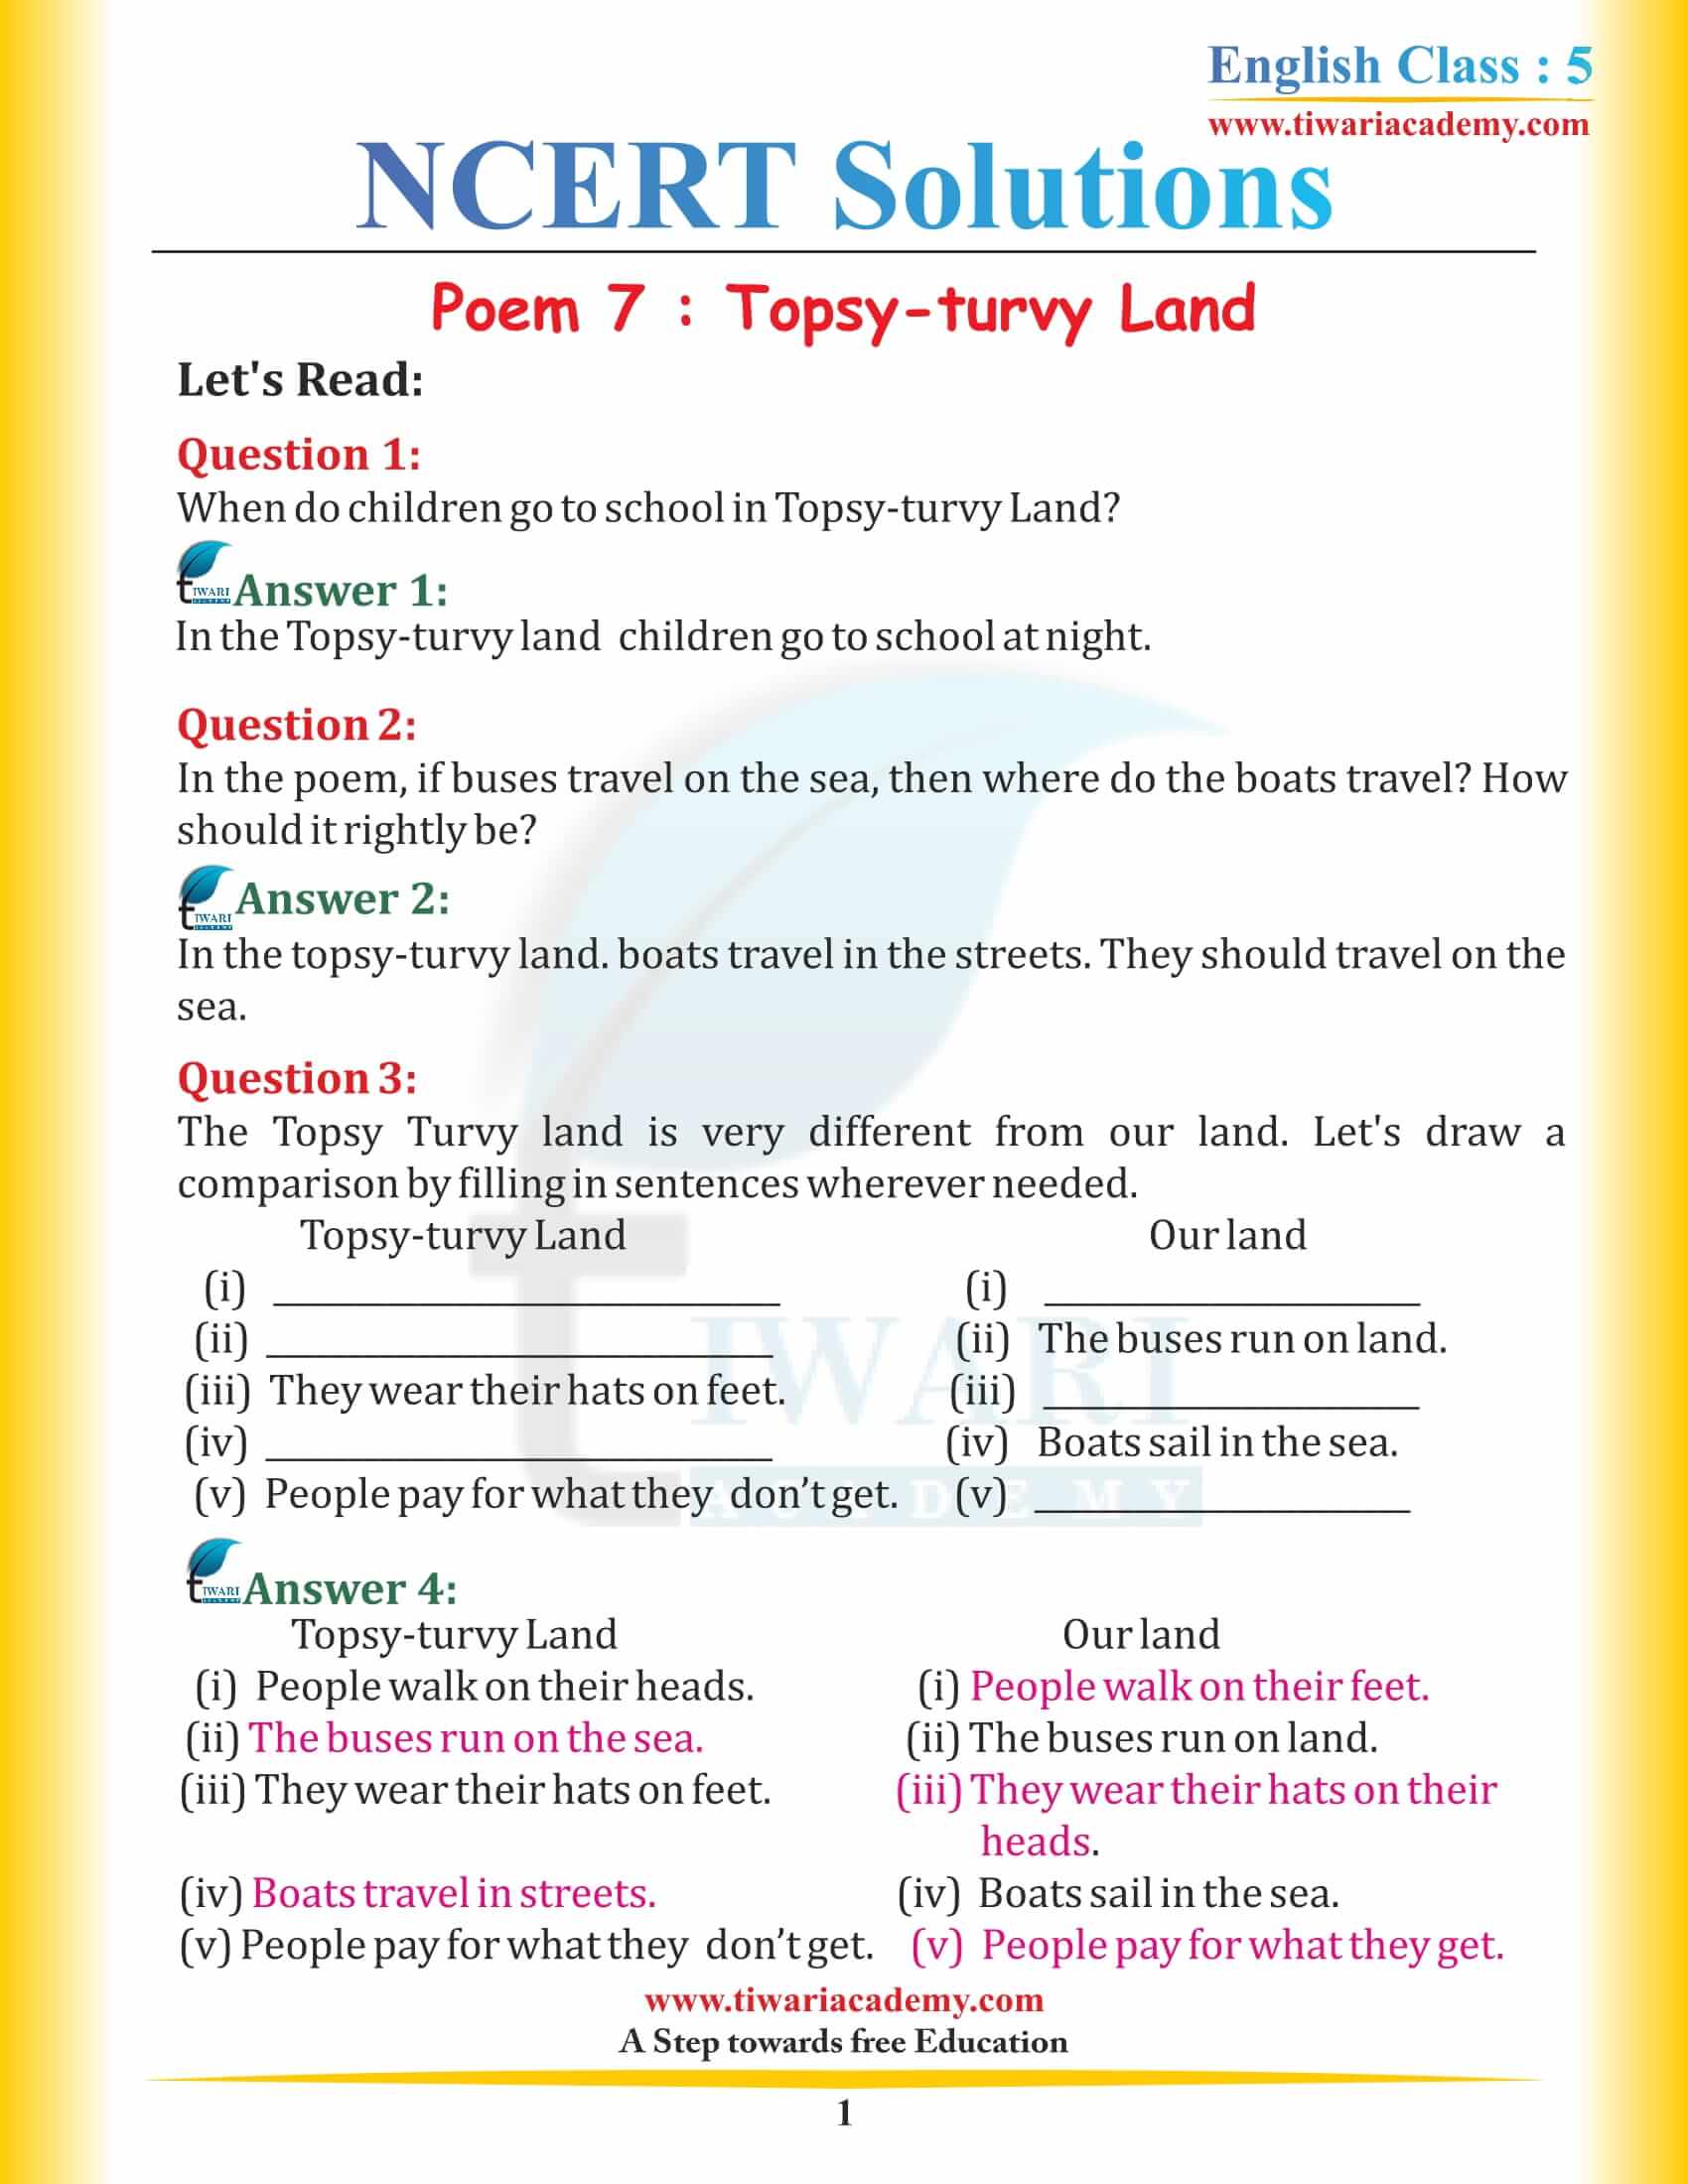 NCERT Solutions for Class 5 English Chapter 7 Topsy-turvy Land